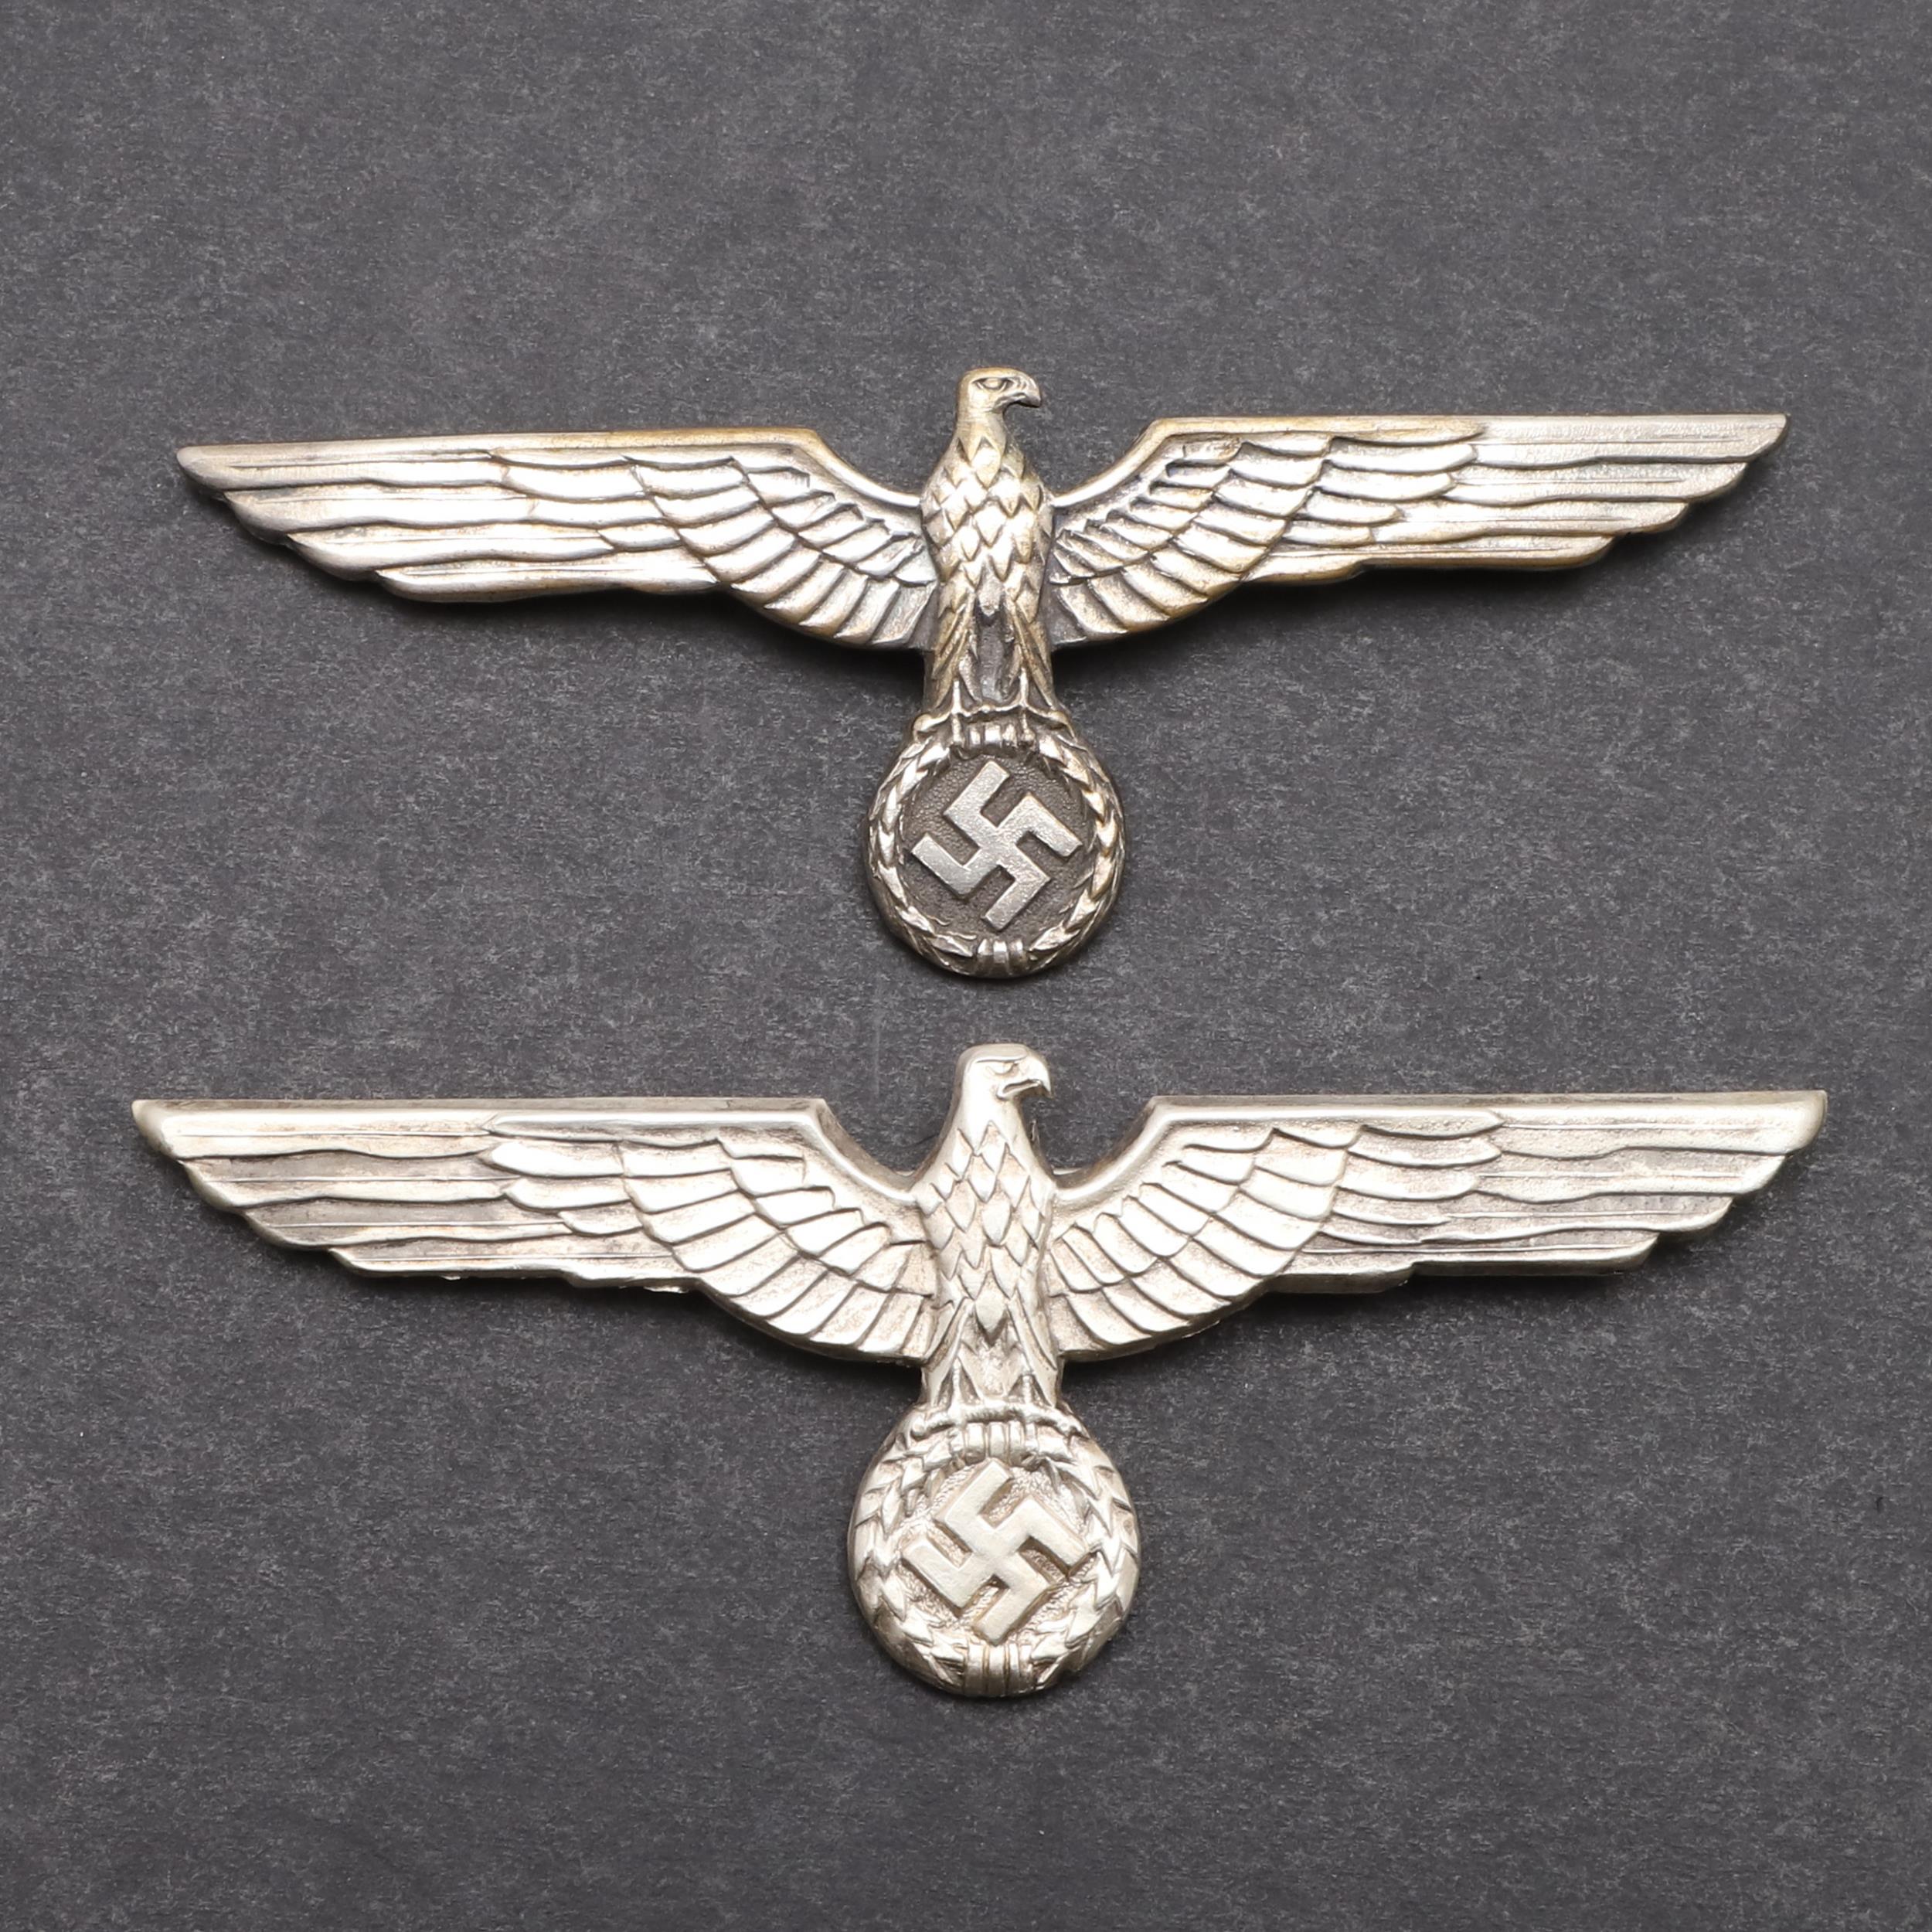 TWO SECOND WORLD WAR GERMAN ARMY OFFICER'S BREAST EAGLES. - Image 2 of 6